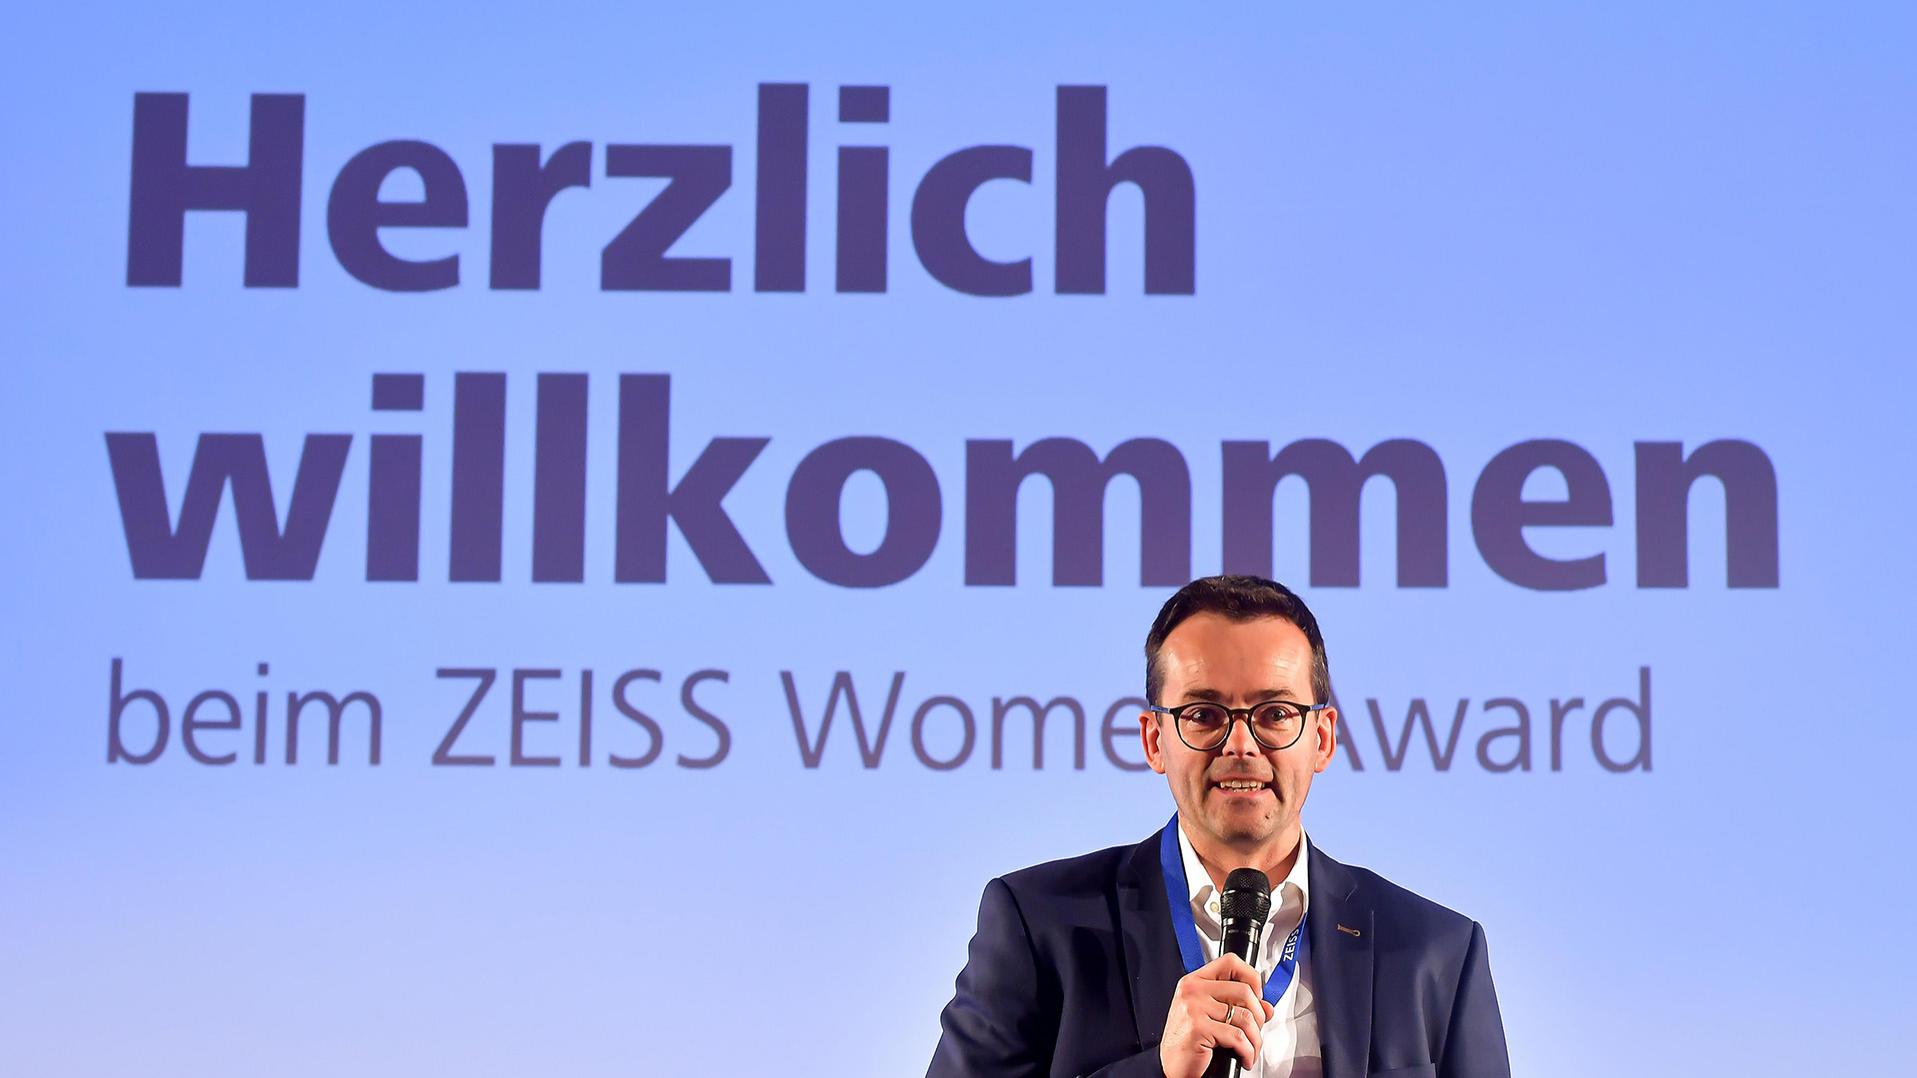 "The ZEISS Women Award is an important medium for drawing attention to talented women in computer science, thus creating role models for the next generation," says Georg von Erffa, Head of Corporate Human Resources at ZEISS.